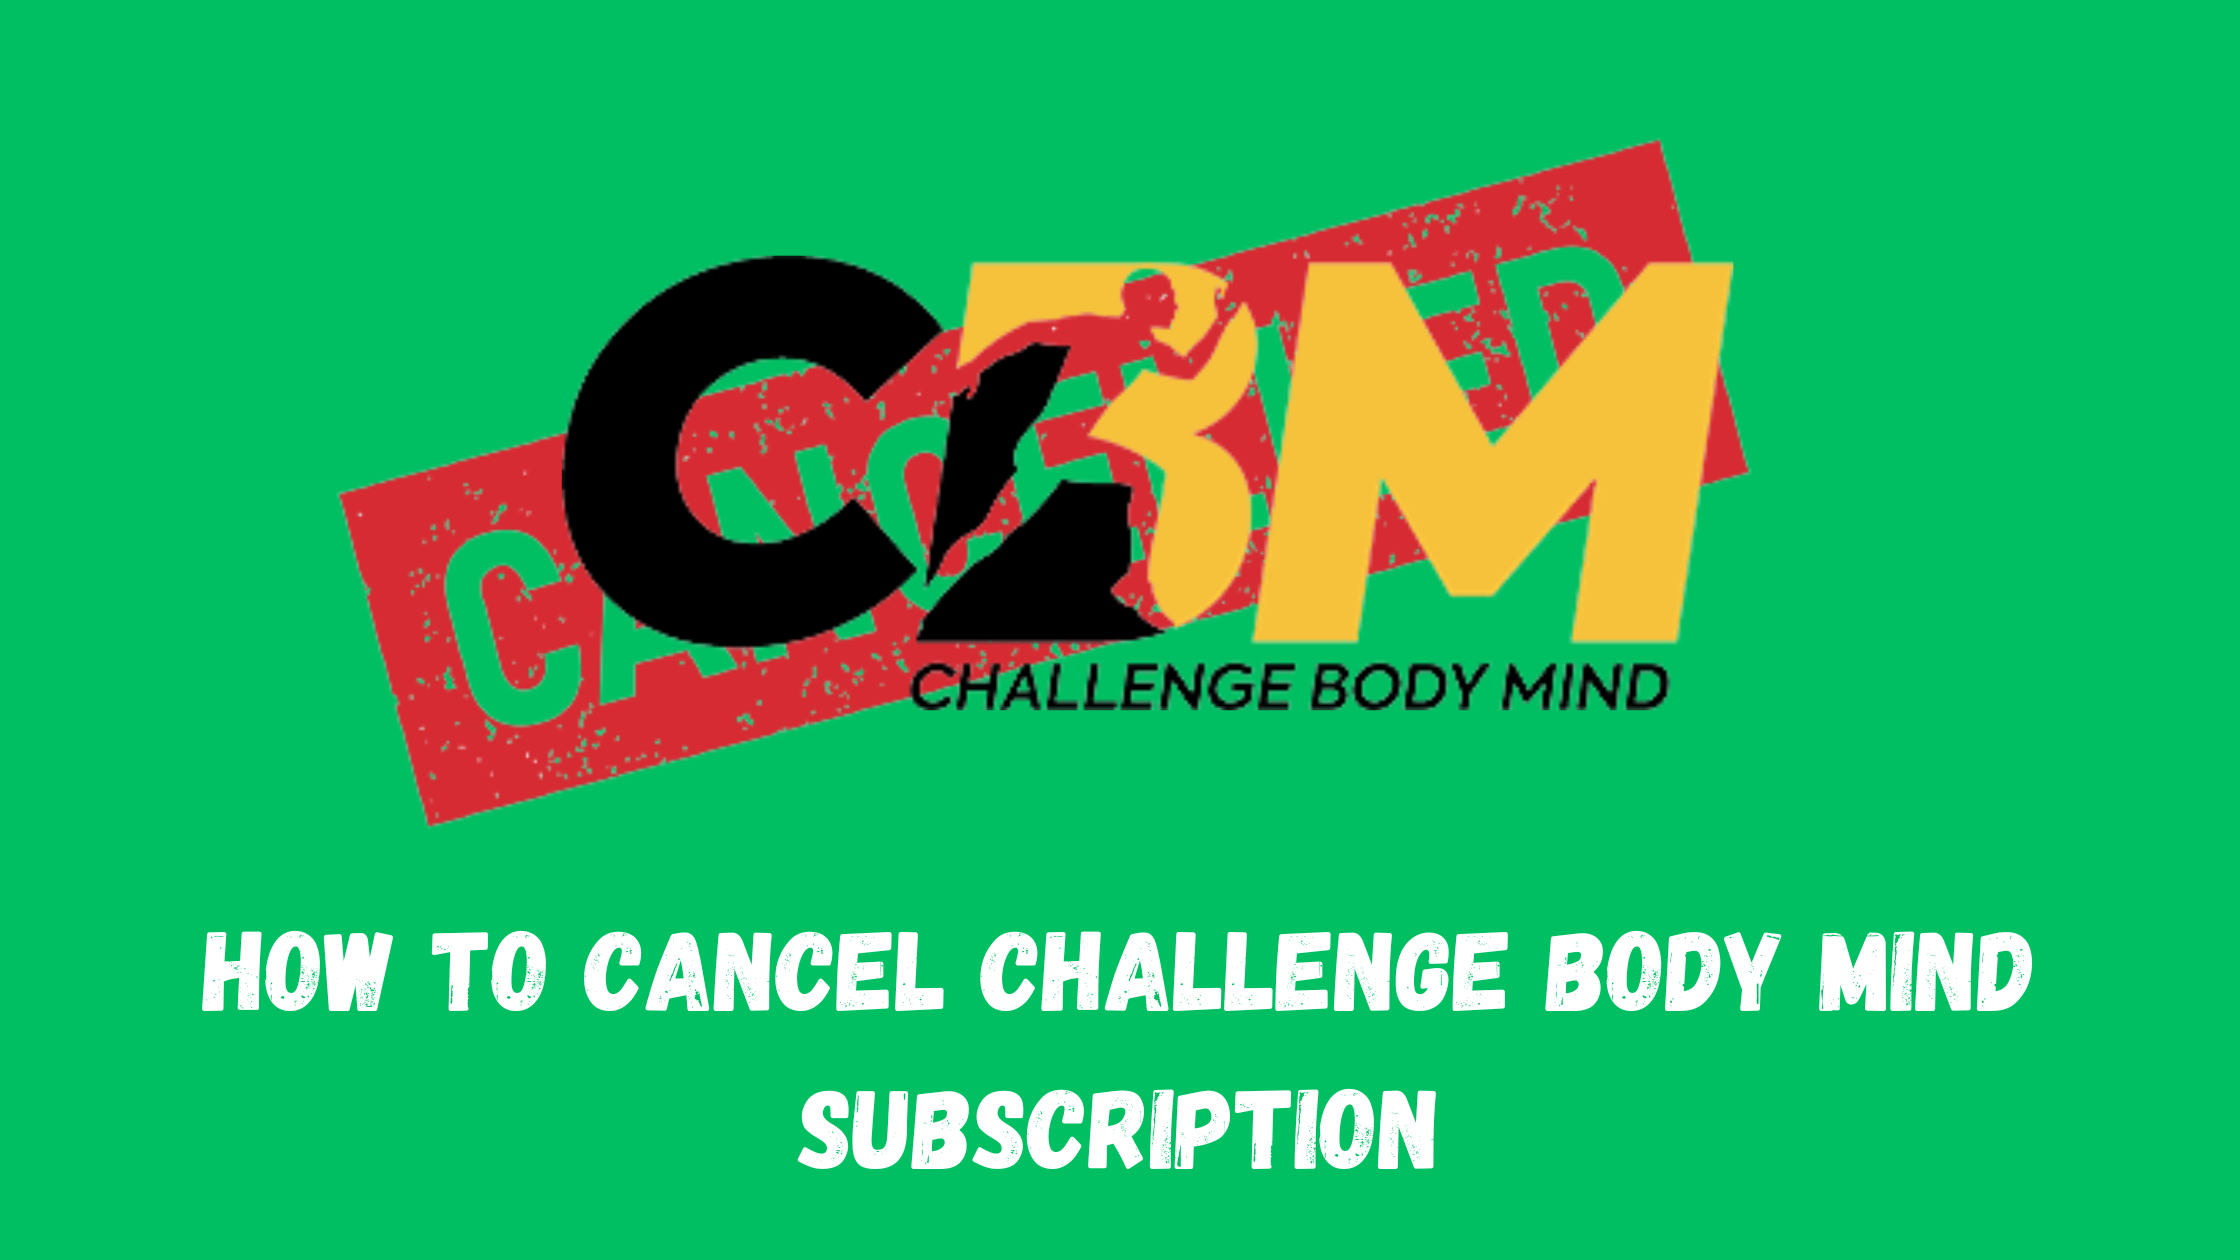 How To Cancel Challenge Body Mind Subscription